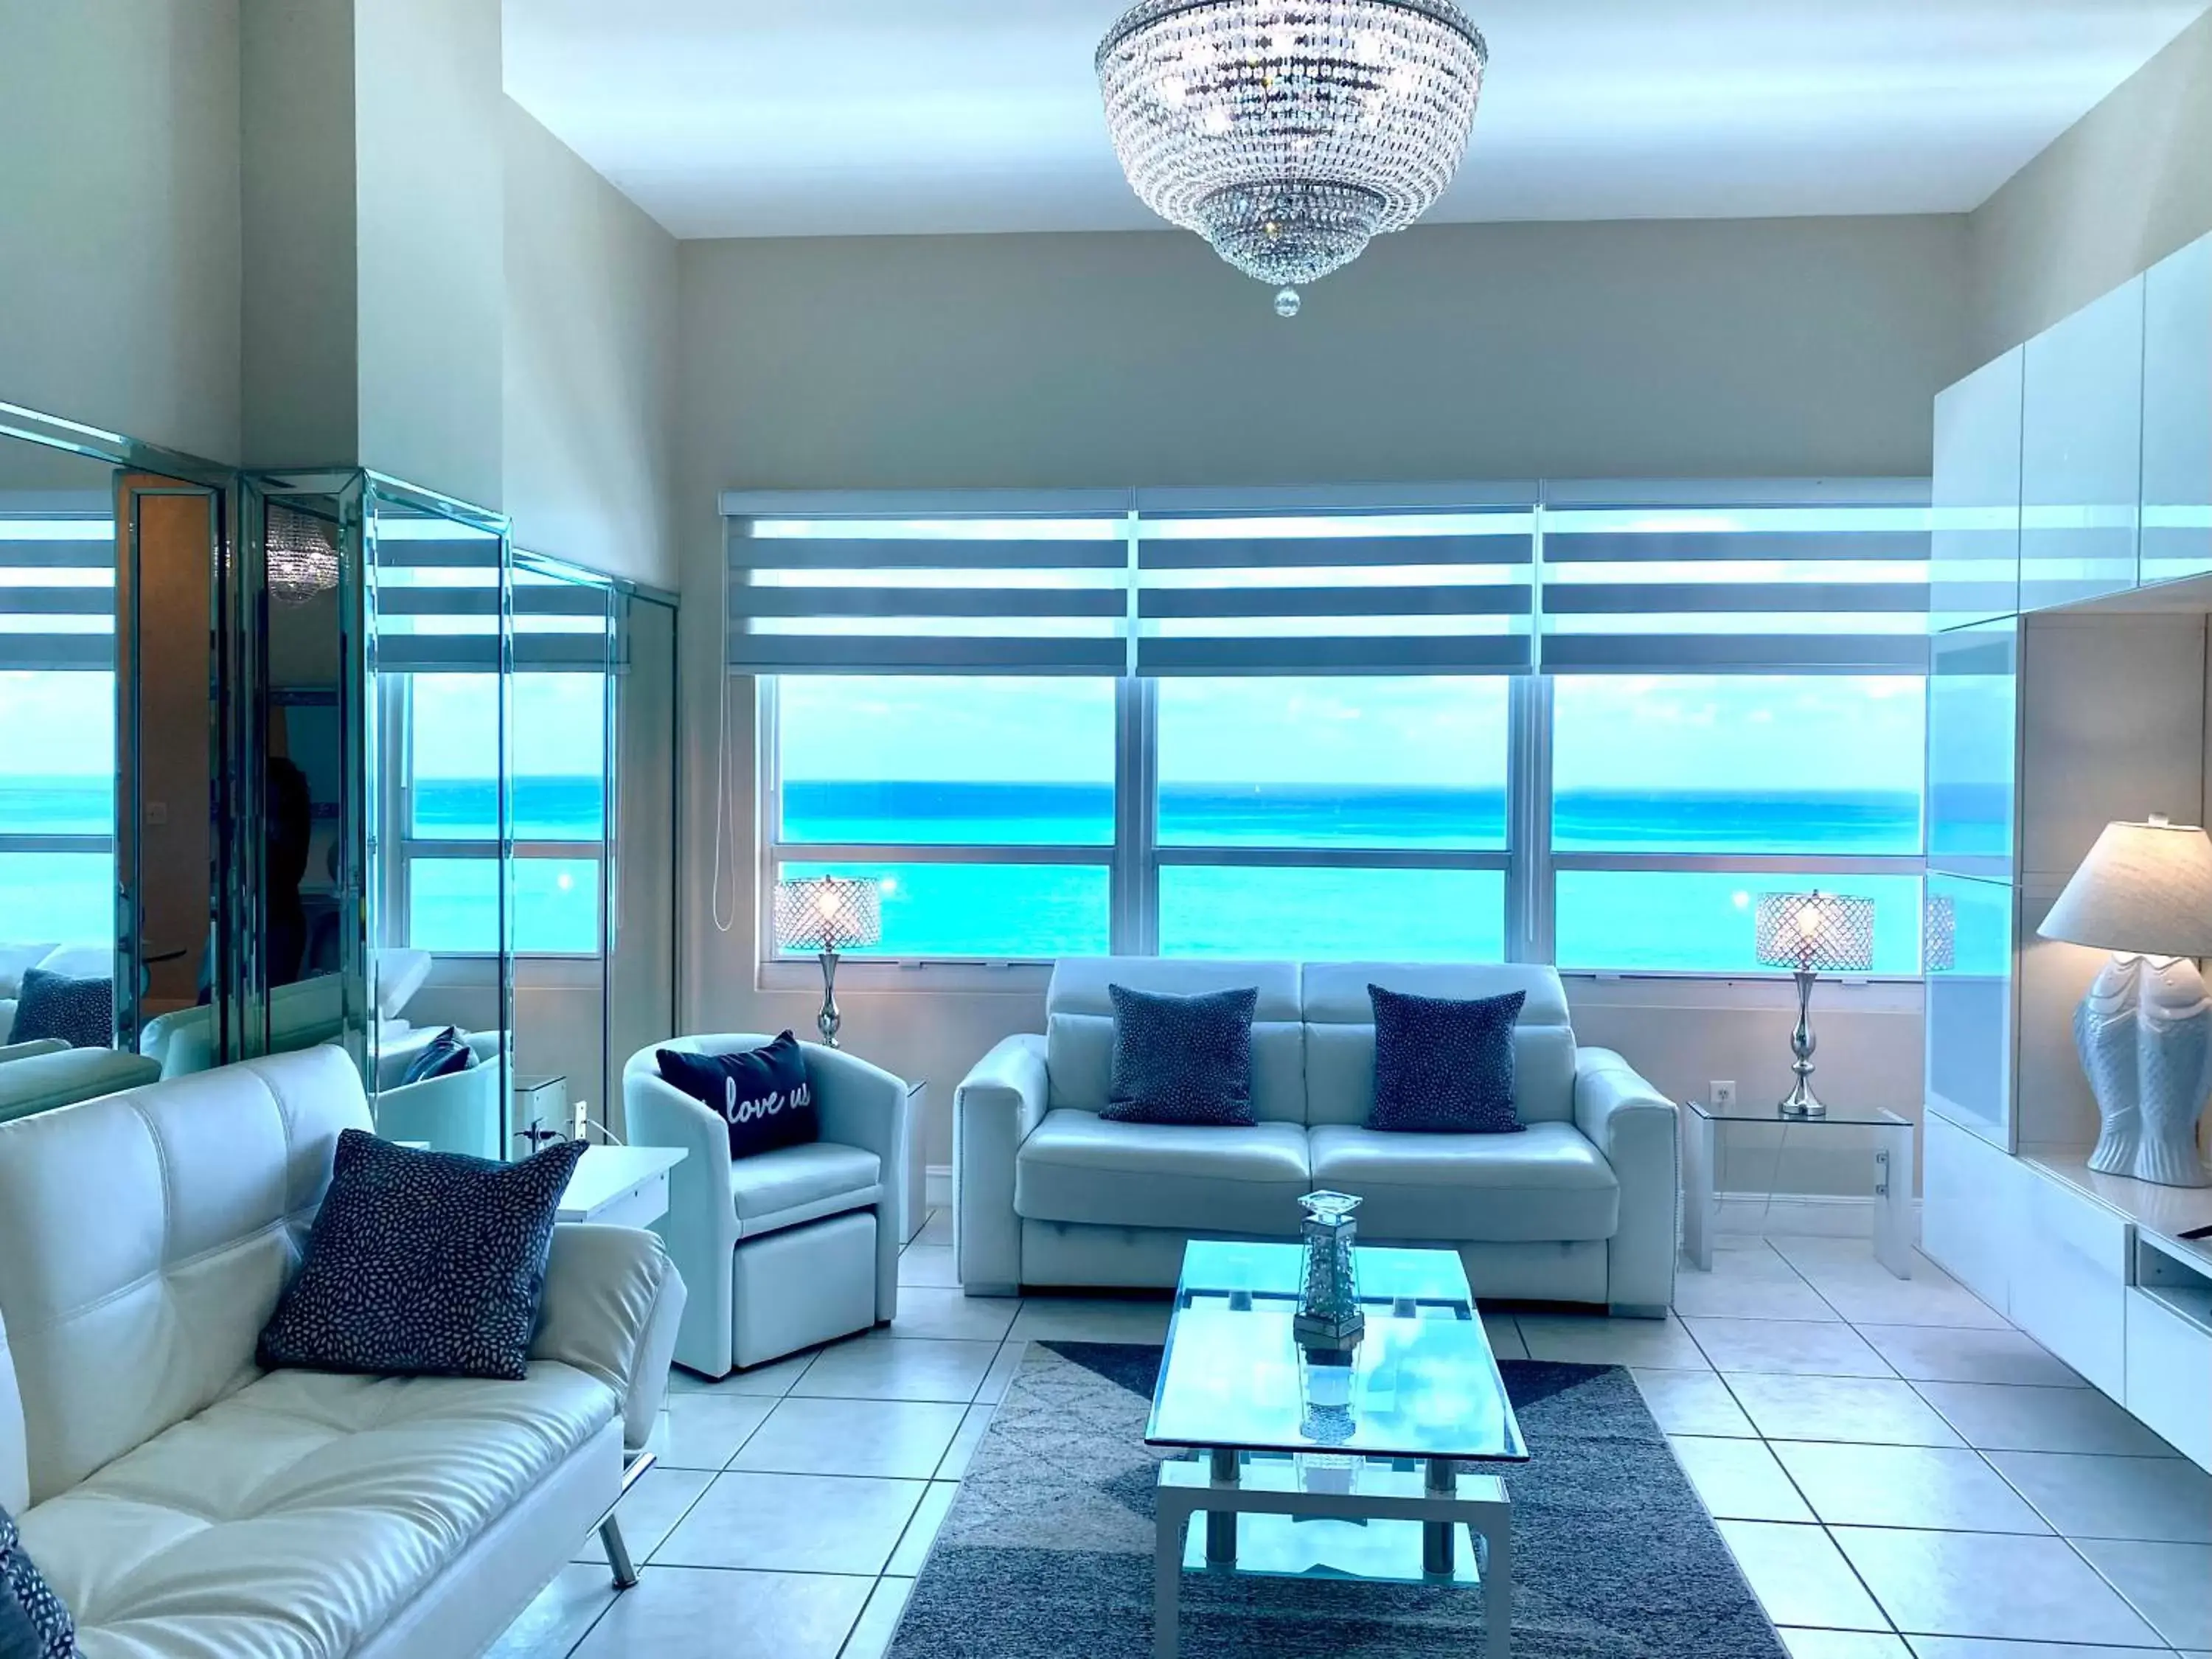 Sea View in Castle Beach Resort Condo Penthouse or 1BR Direct Ocean View -just remodeled-